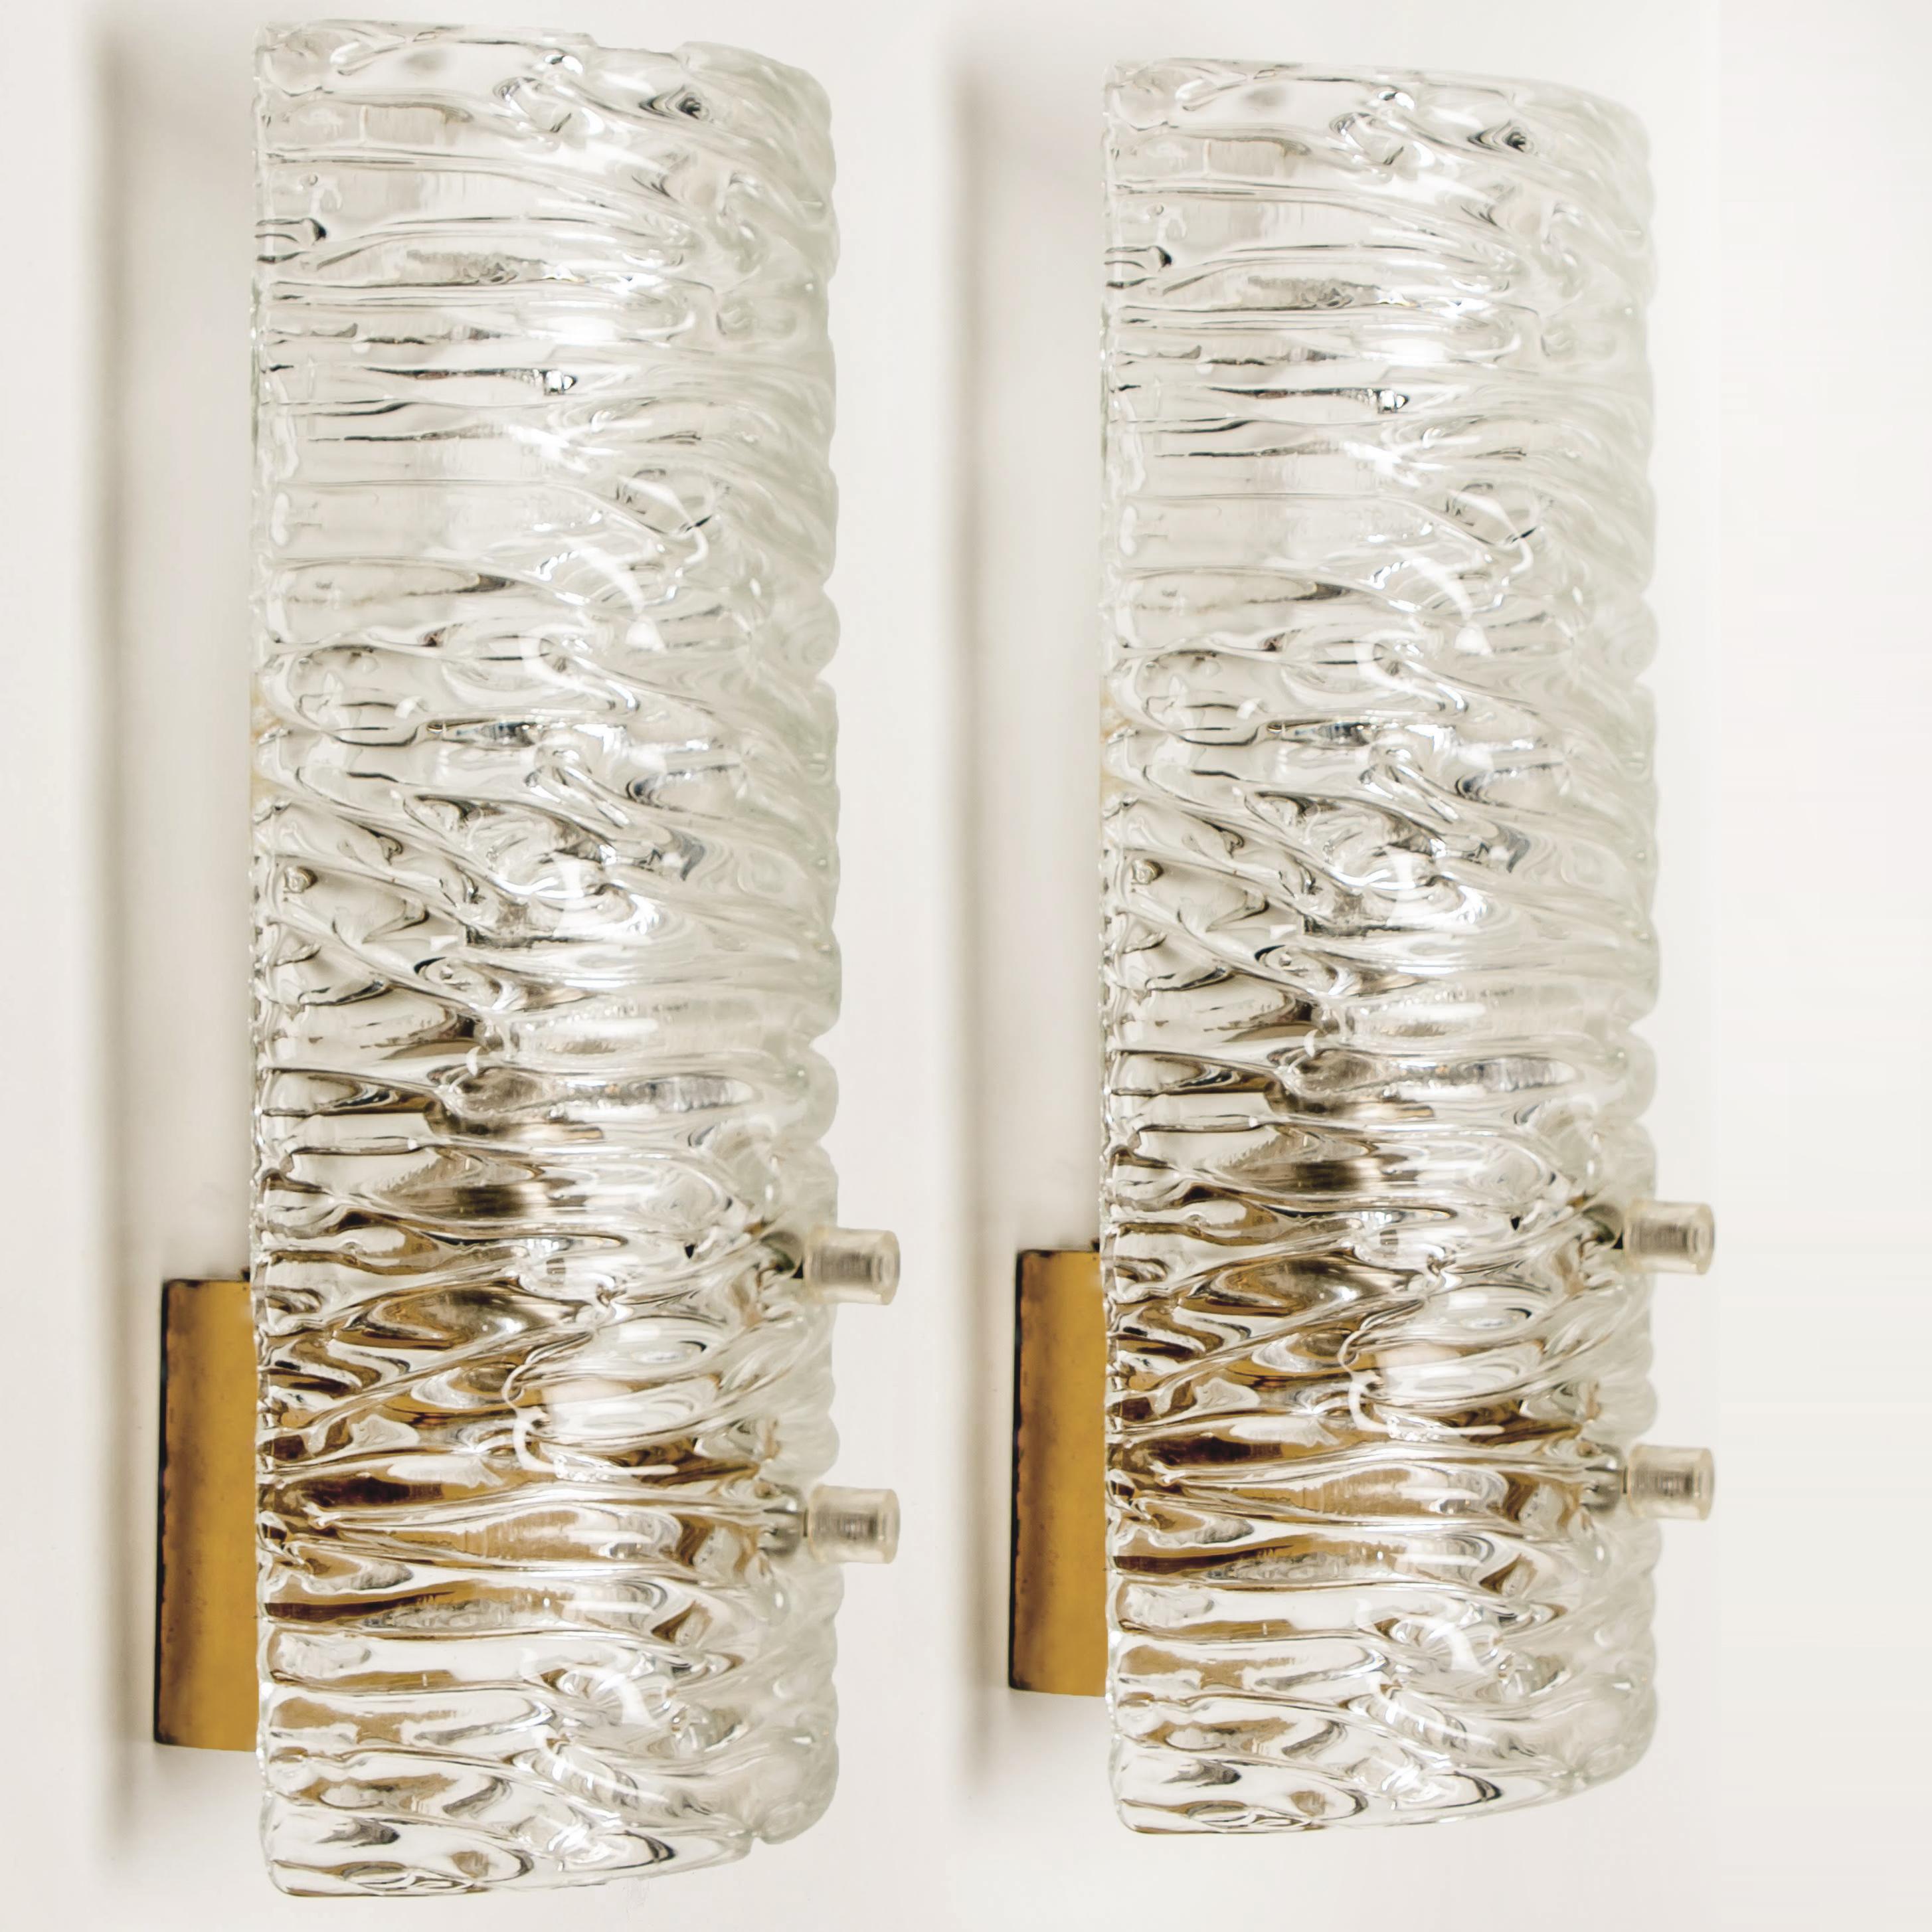 Two wall lights by J.T. Kalmar, Vienna, Austria, manufactured in circa 1960. This pair is handmade and high end. Each wall light has a half round wave textured glass shade with a brass back plate,

The wave texture gives a nice diffuse light